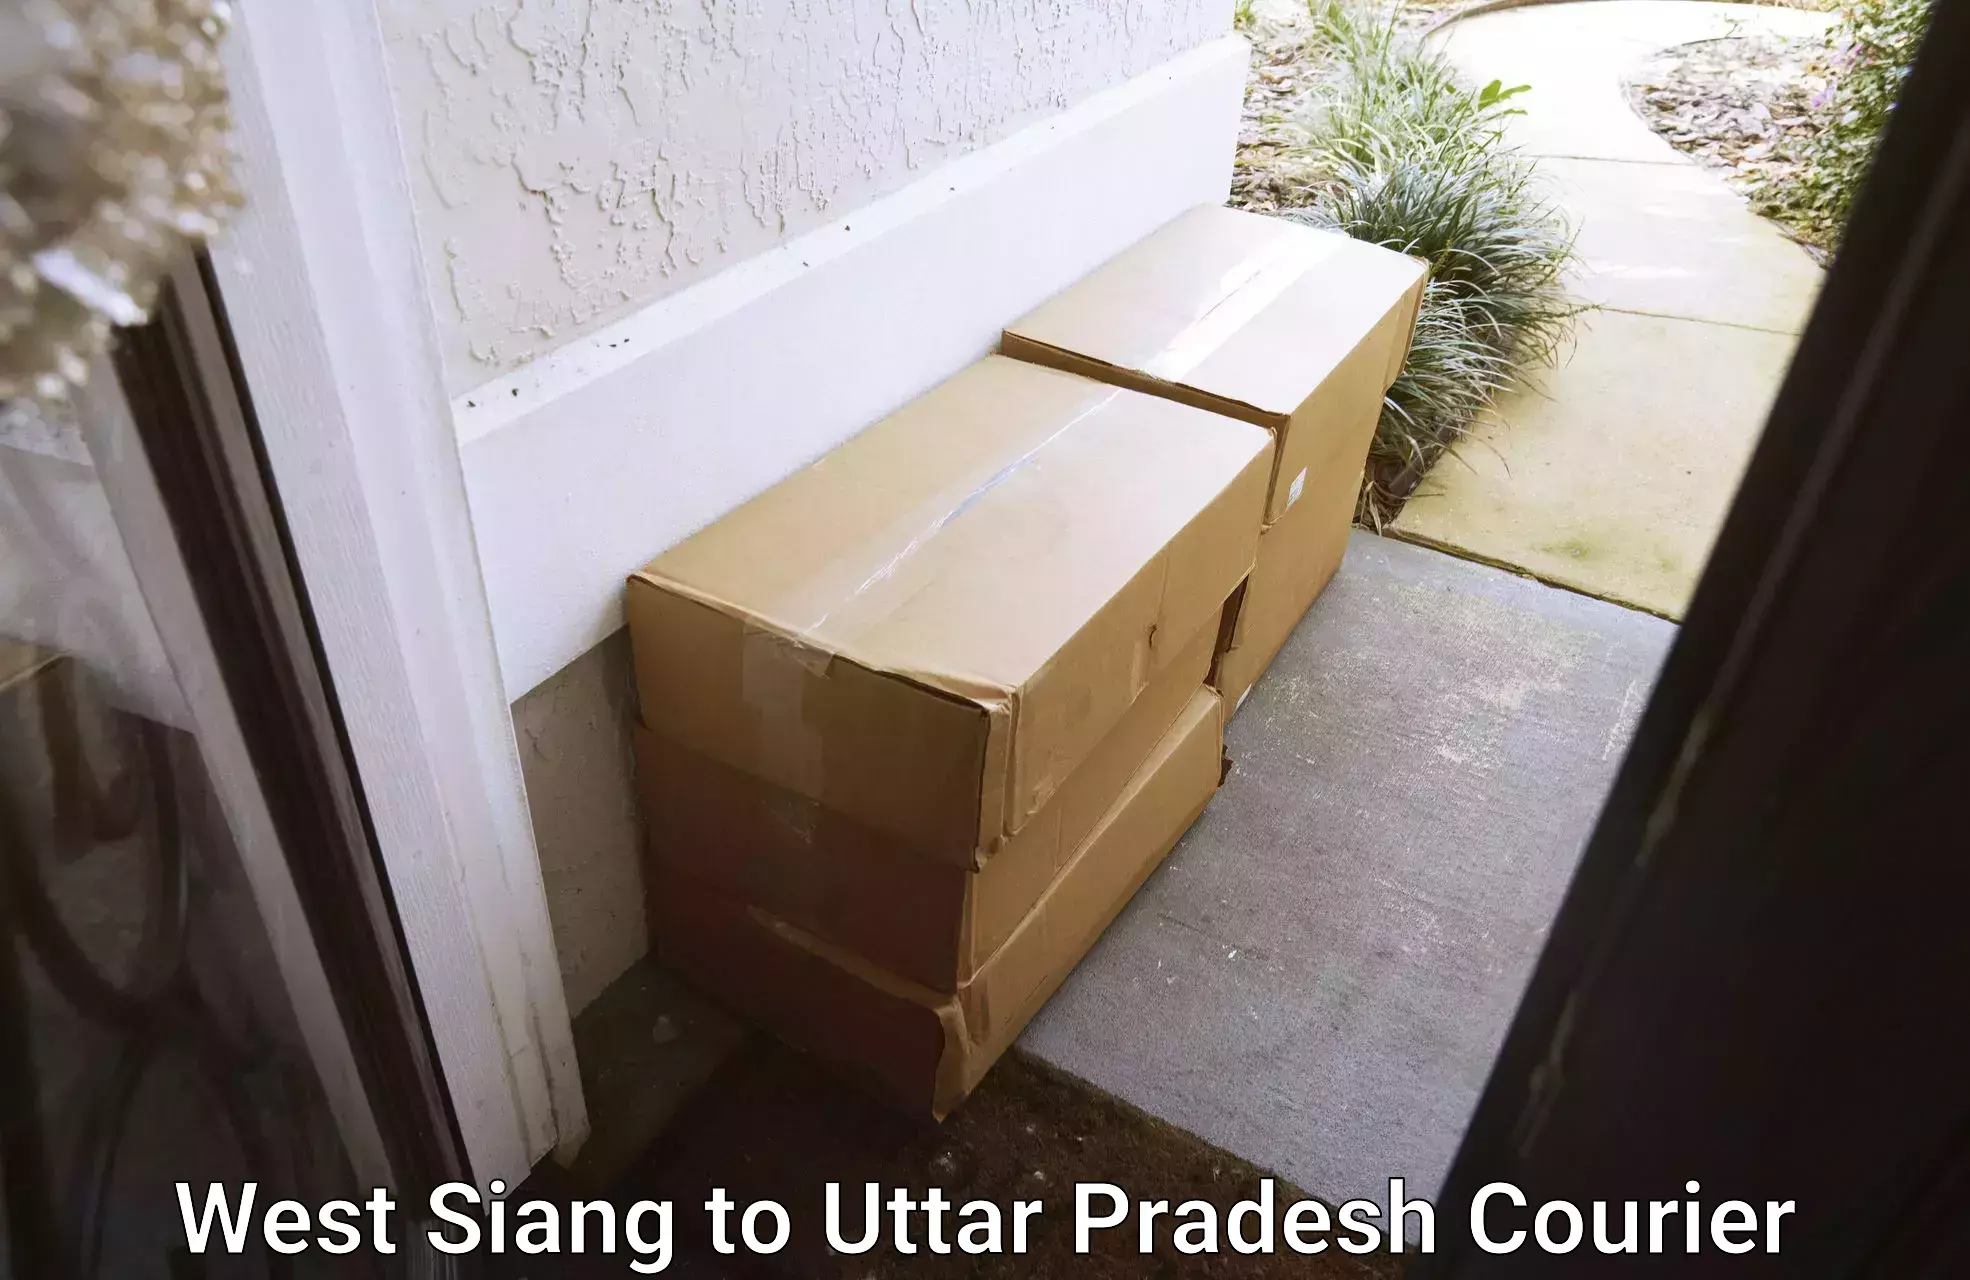 Courier service comparison West Siang to Dadri